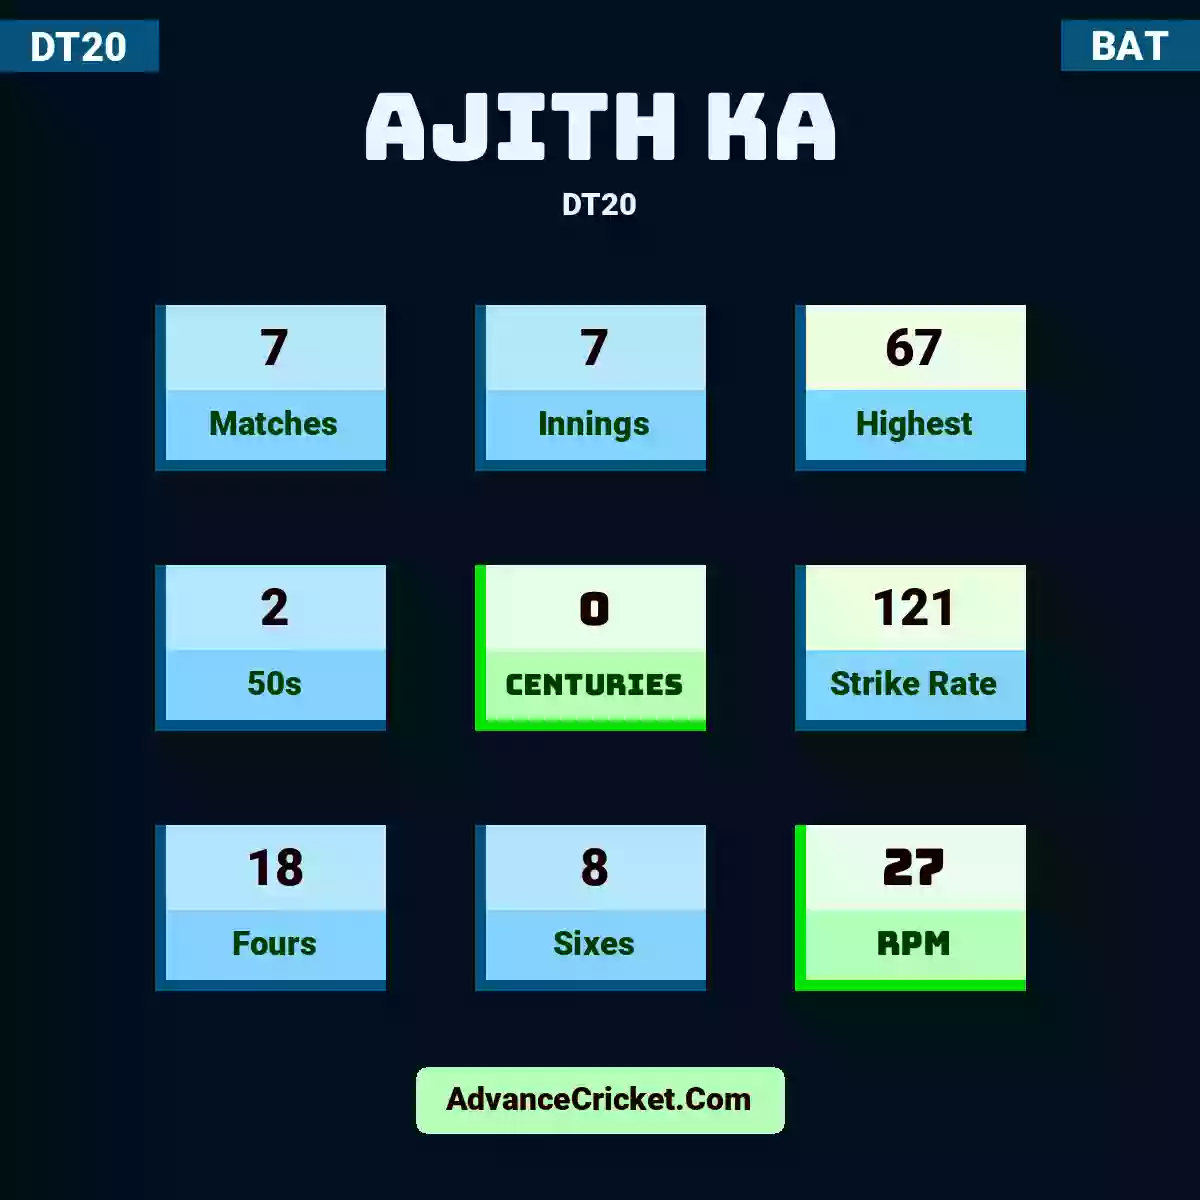 Ajith KA DT20 , Ajith KA played 7 matches, scored 67 runs as highest, 2 half-centuries, and 0 centuries, with a strike rate of 121. A.KA hit 18 fours and 8 sixes, with an RPM of 27.